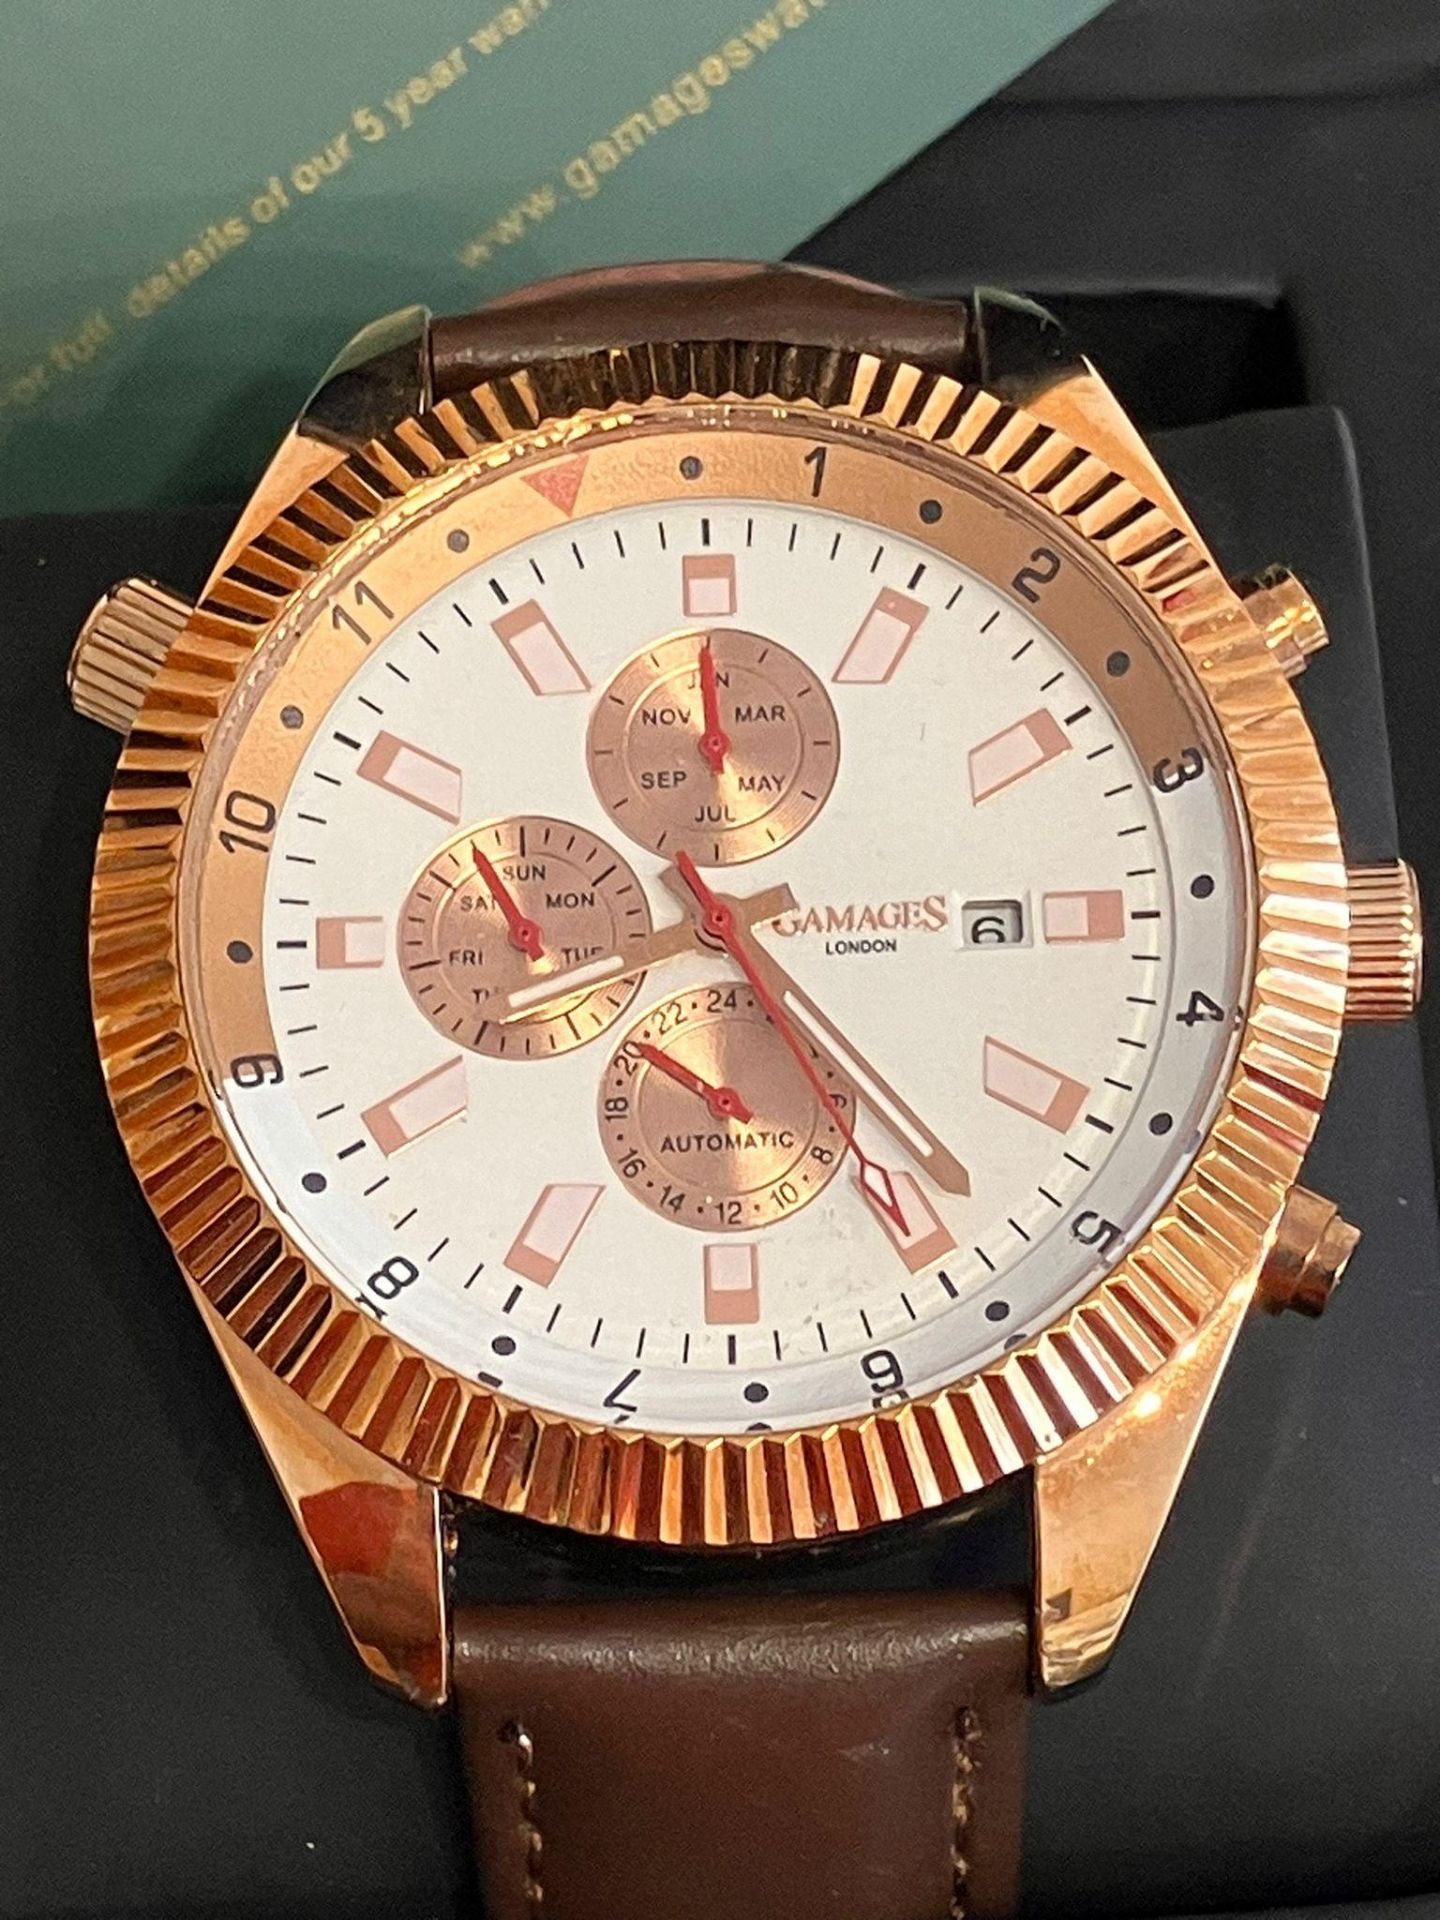 GAMAGES LONDON AUTOMATIC CHRONOGRAPH.ROTATOR LIMITED EDITION 8400. Skeleton back. Brown leather - Image 3 of 7